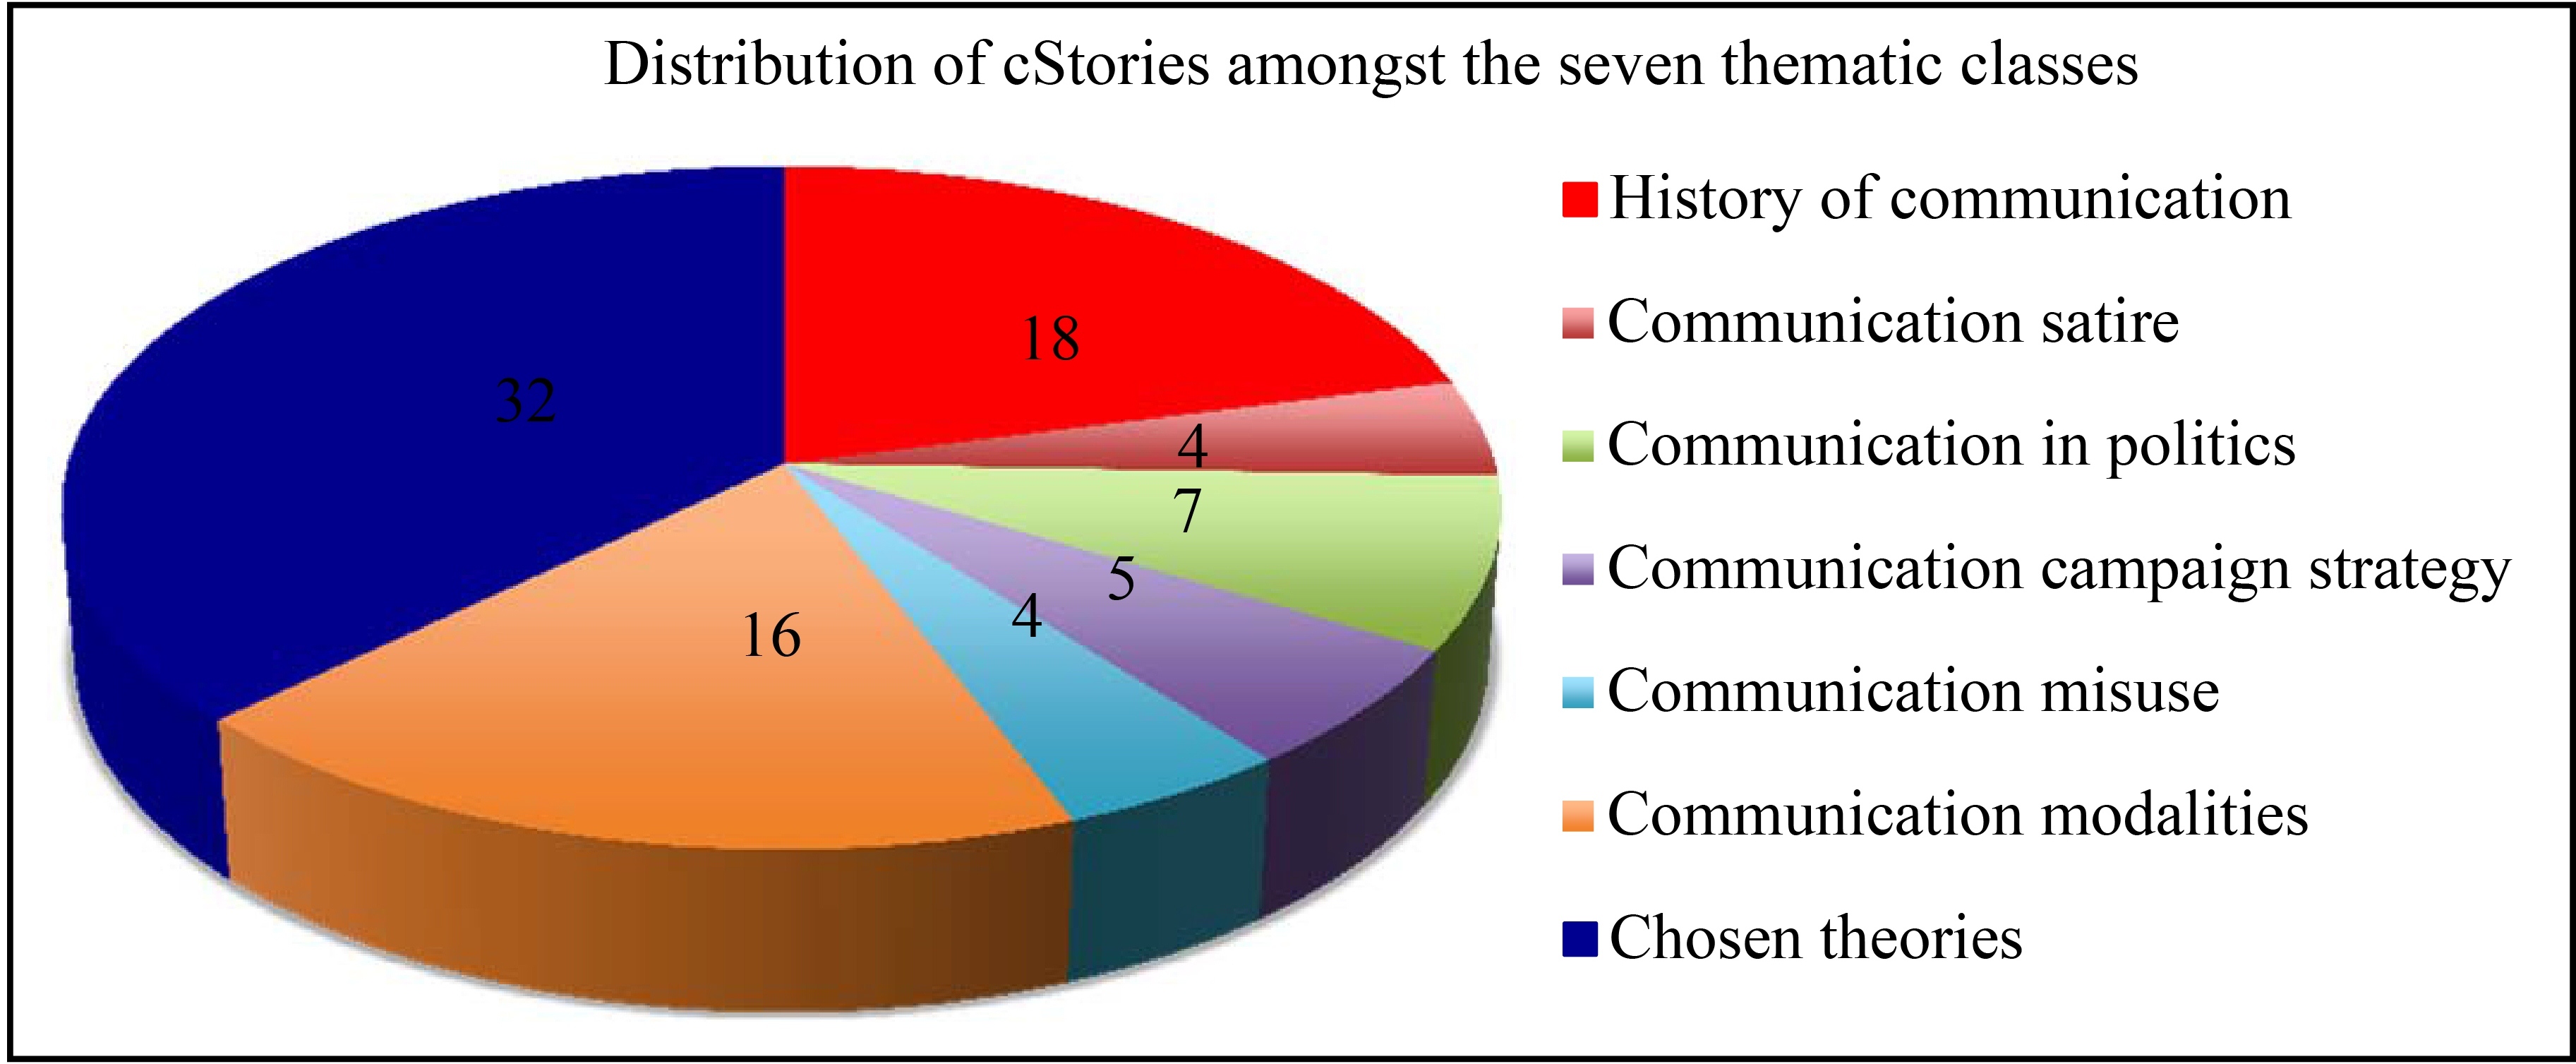 Pie chart showing the distribution of the stories in the seven thematic classes.